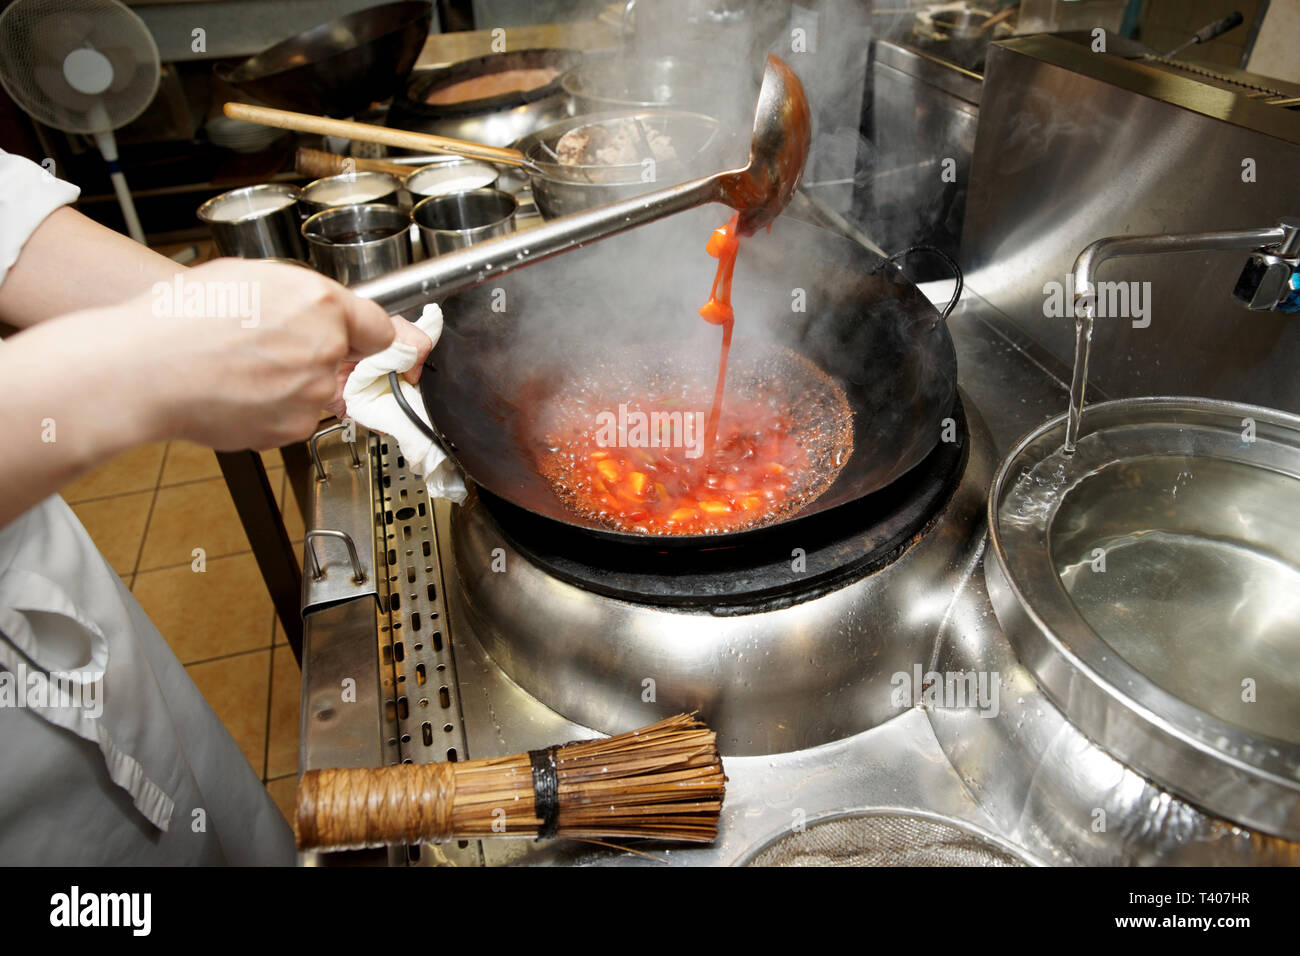 Kitchen Clips: Inside the kitchen of Wong Wok Chinese Restaurant